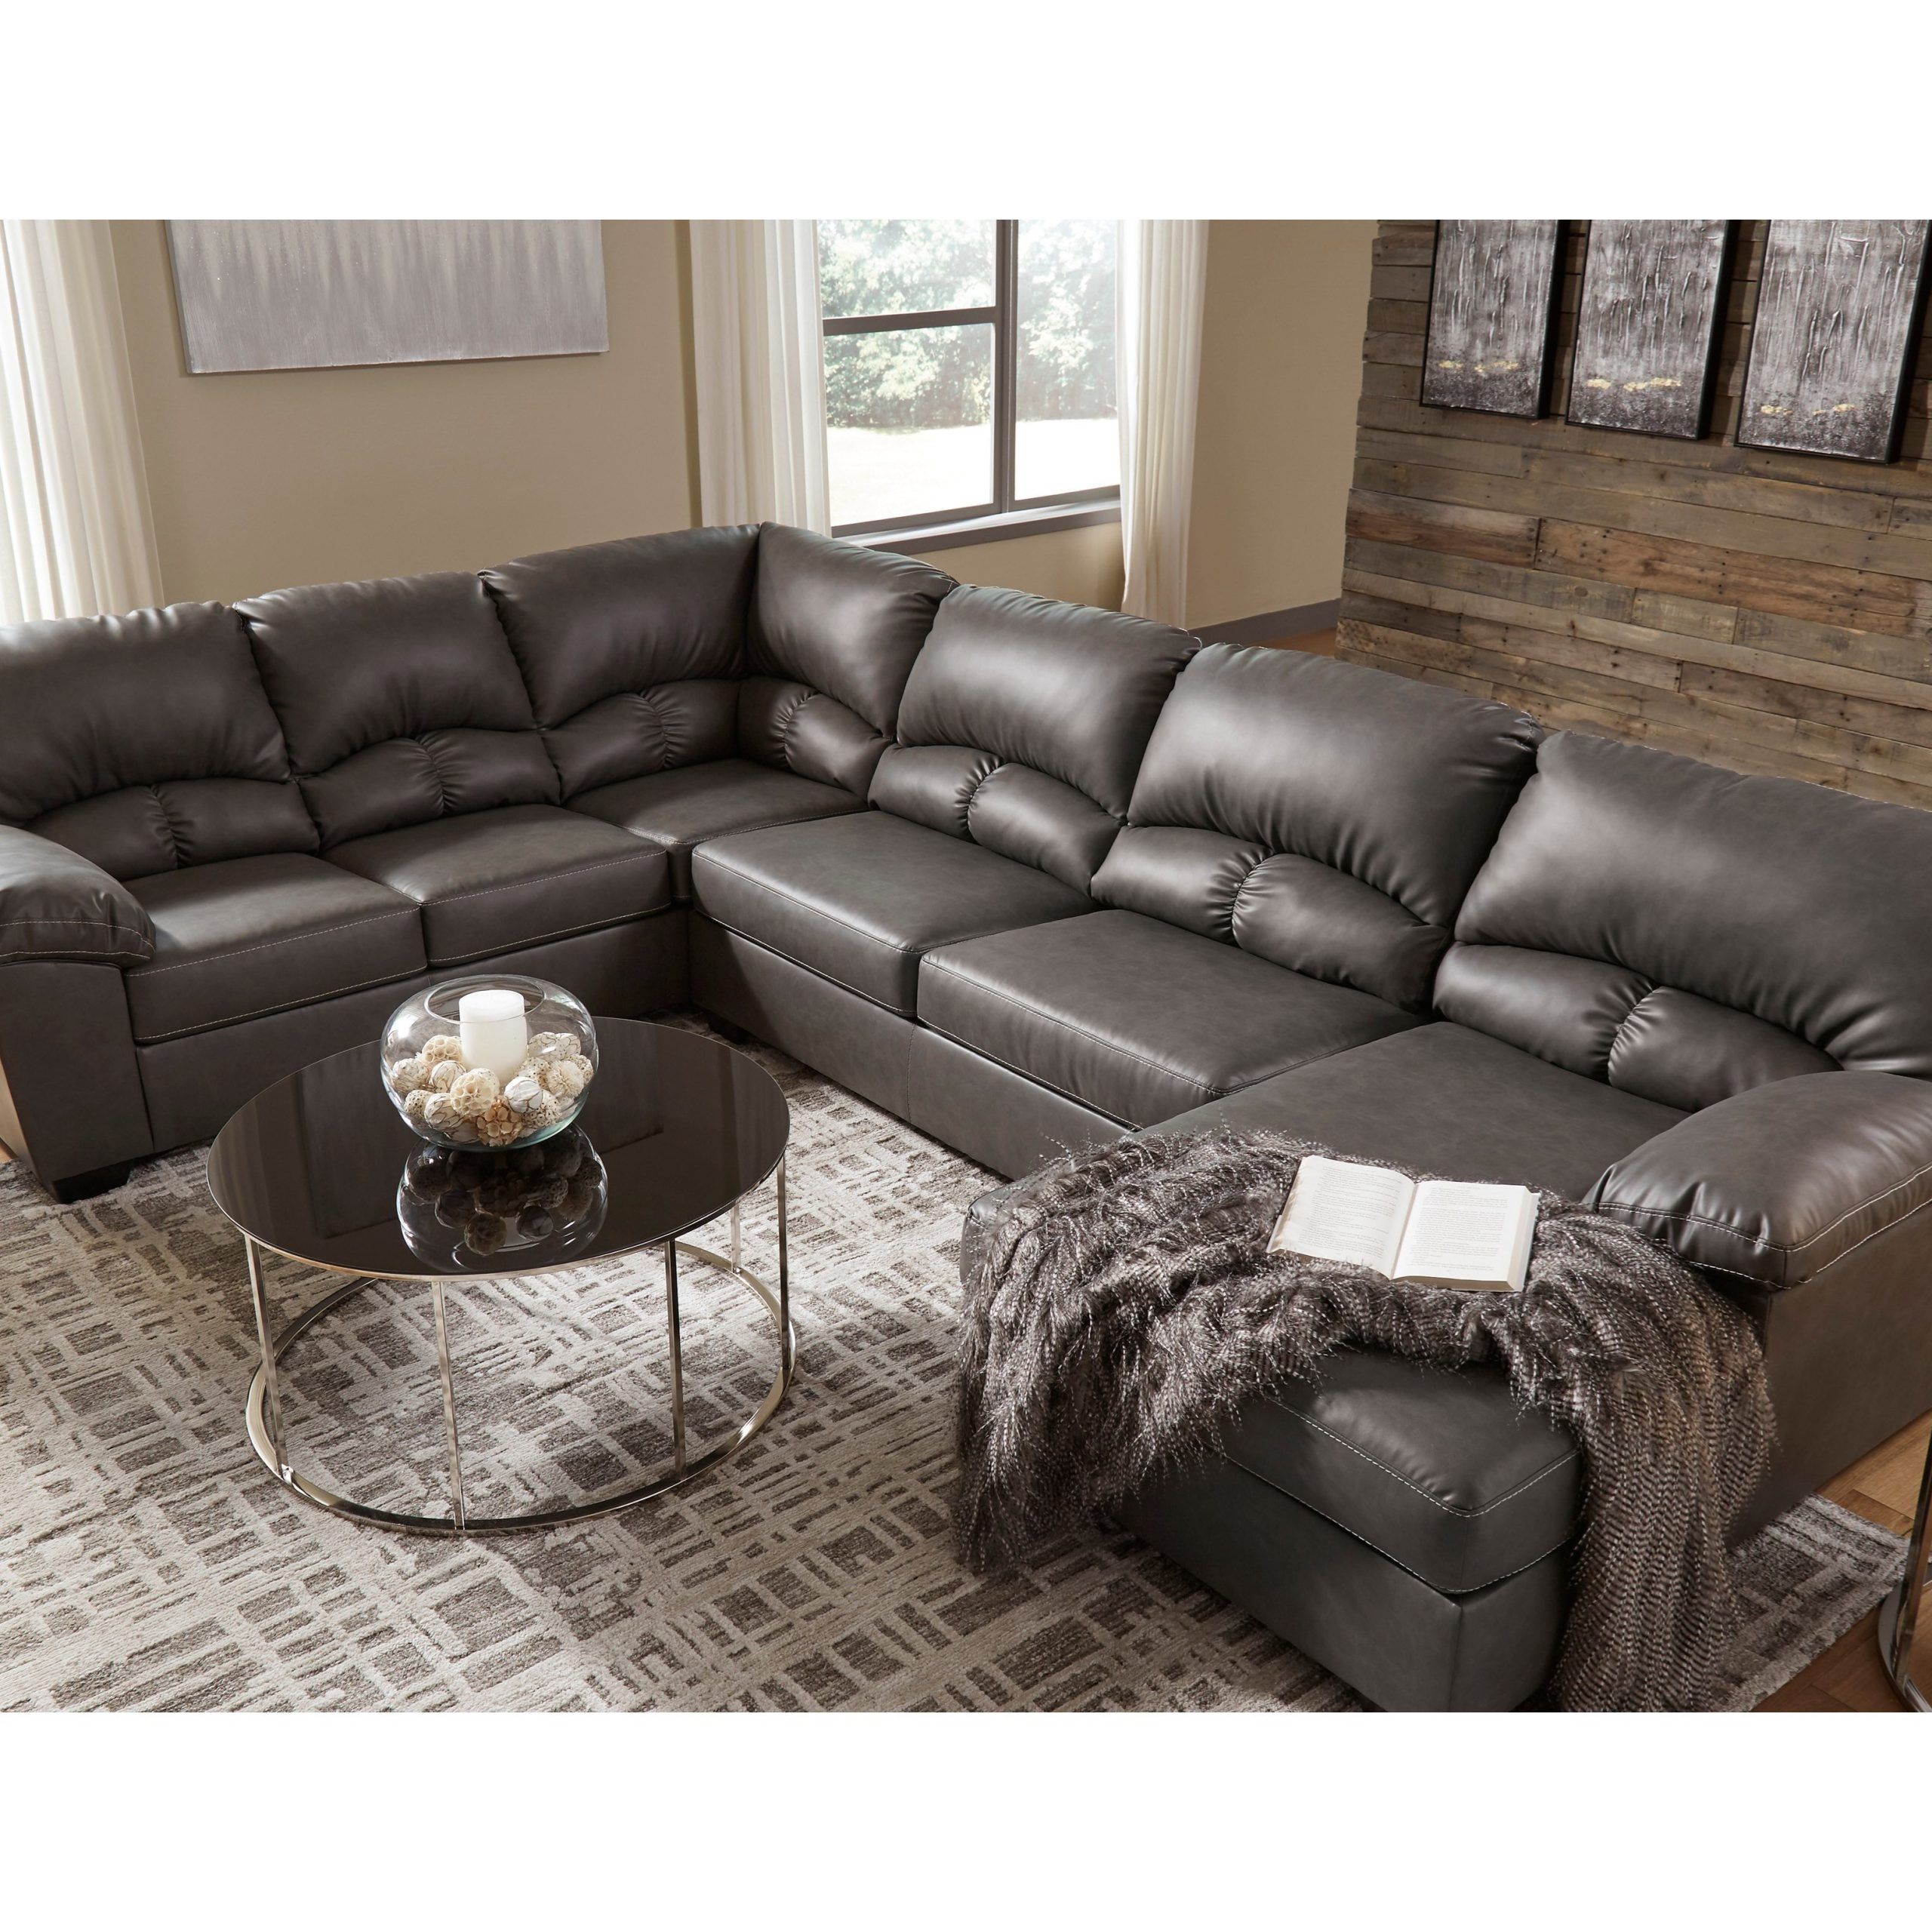 Benchcraft Aberton Faux Leather 3 Piece Sectional With Chaise | Wayside Within Faux Leather Sectional Sofa Sets (View 2 of 21)